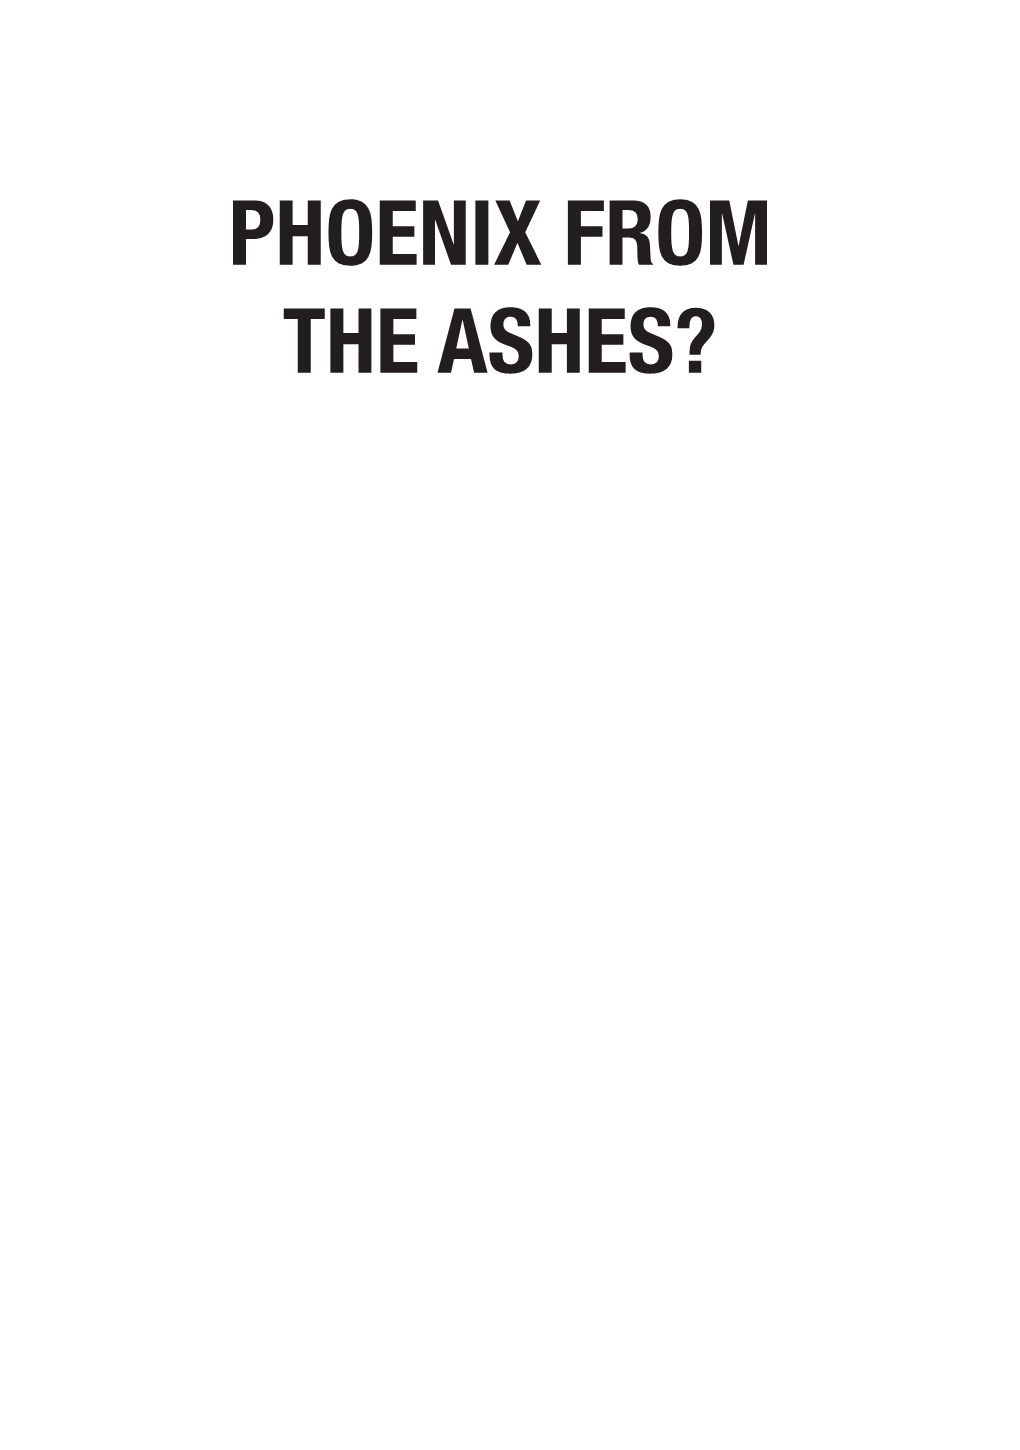 Phoenix from the Ashes?